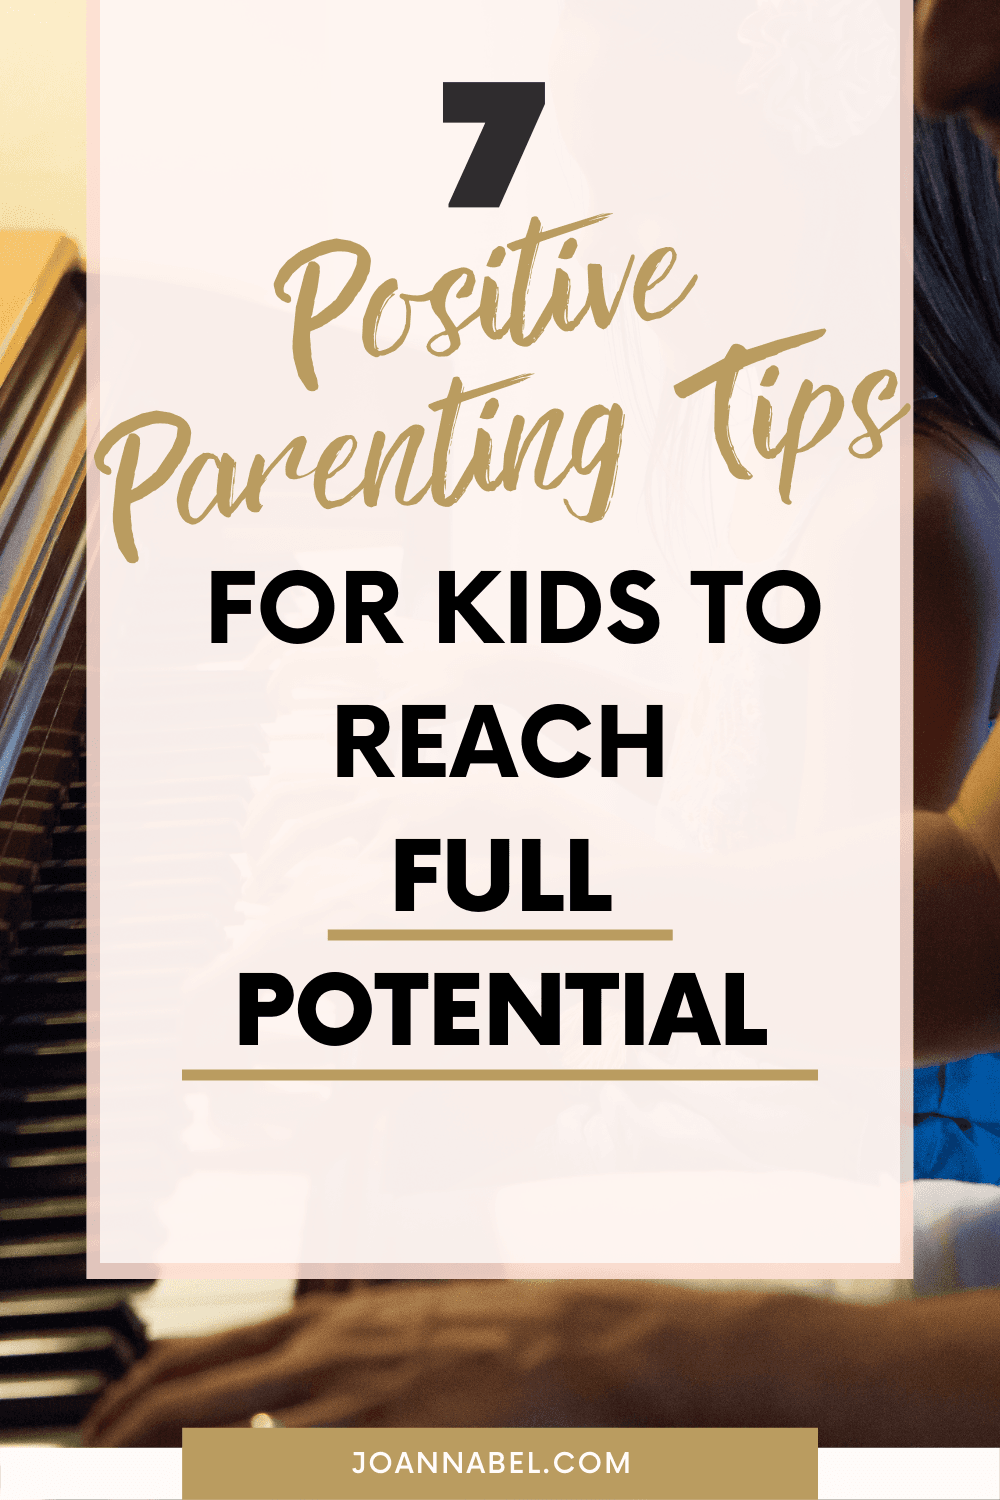 Pin image with text - 7 positive parenting tips for kids to reach full potential - in front and in the back is a photo of a father and a daughter playing the piano